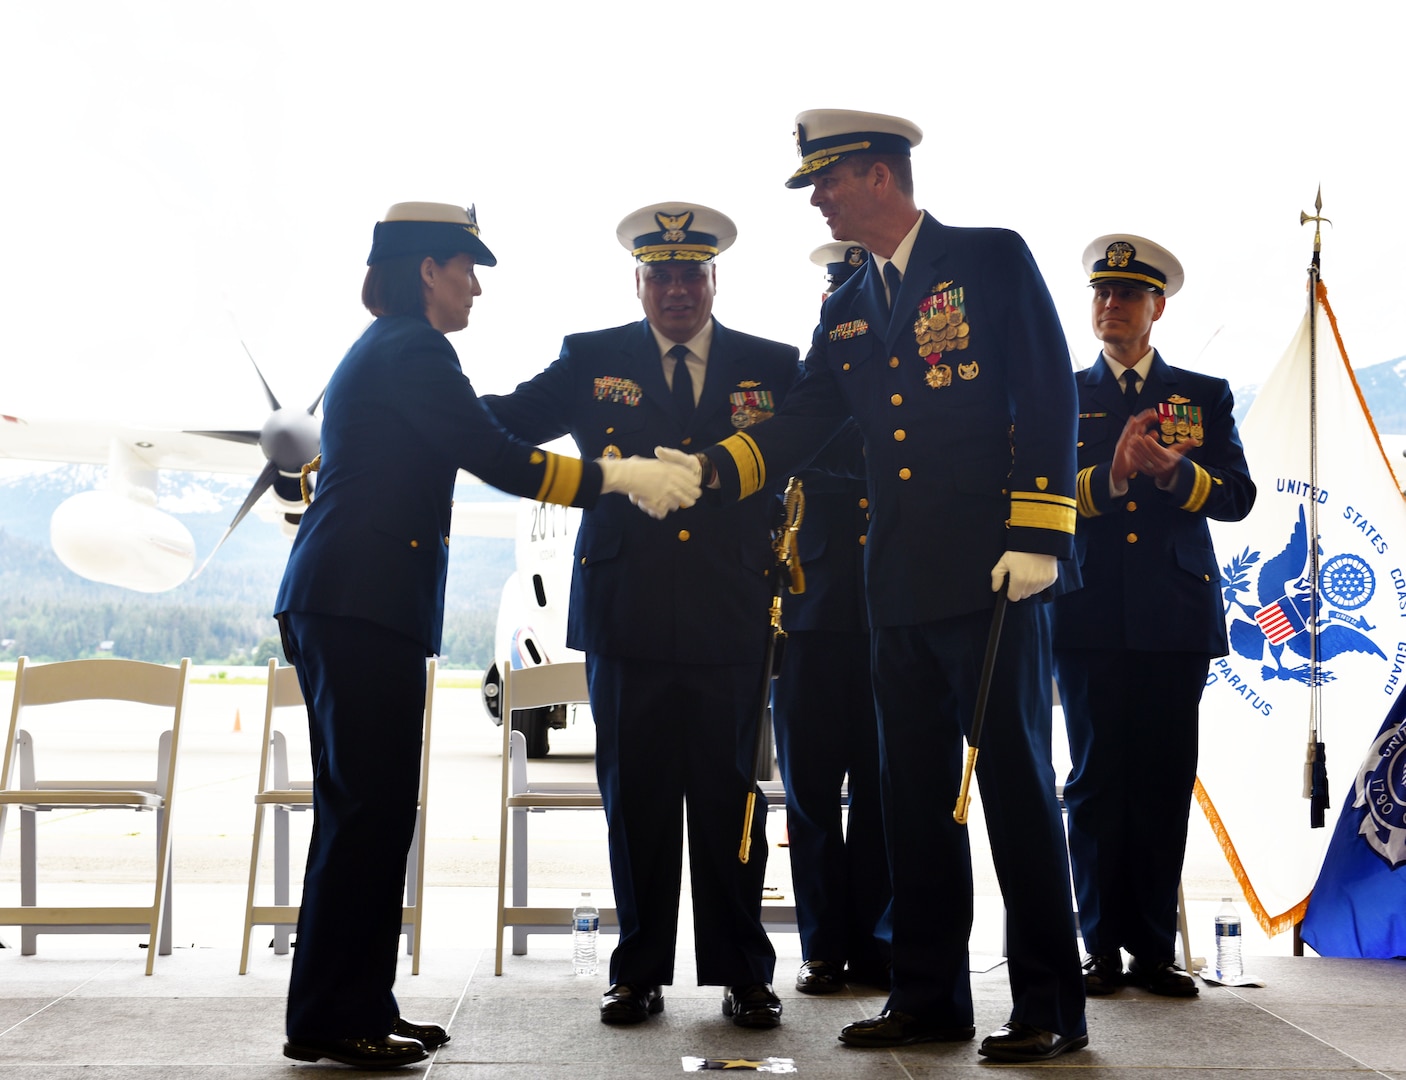 Rear Admiral Megan Dean, Seventeenth district commander, speaks during the Coast Guard 17th District change-of command ceremony at the Alaska Army National Guard Army Aviation Operating Facility in Juneau, Alaska, June 8, 2023.
 
Rear Adm. Nathan Moore transferred the command of the Coast Guard’s 17th District to Rear Adm. Megan Dean under the supervision of Vice Adm. Andrew J. Tiongson.
 
As the 17th District commander, Dean, will be responsible for all Coast Guard operations throughout Alaska, the North Pacific and the Arctic which includes protecting life and property, enforcing federal laws and treaties, preserving living marine resources, and promoting national security. Headquartered in Juneau, the 17th District encompasses 3.8 million square miles and over 44,000 miles of shoreline. During an average year the 2,500 active duty, reserve, civilian and auxiliary personnel of the 17th District save 264 lives and assist 636 people.
 
Dean was previously assigned as the Coast Guard director of governmental and public affairs. She was responsible for responsible for external engagement with Congress, the media, and other inter-governmental entities.
 
Moore, who originally took command of the 17th District in April 2021, is transferring to Portsmouth, VA., where he will serve as the deputy commander for Coast Guard Atlantic Area.
  
A change-of-command ceremony marks a transfer of total responsibility and authority from one individual to another. It is a time-honored tradition conducted before the assembled crew, as well as honored guests and dignitaries to formally demonstrate the continuity of the authority within a command